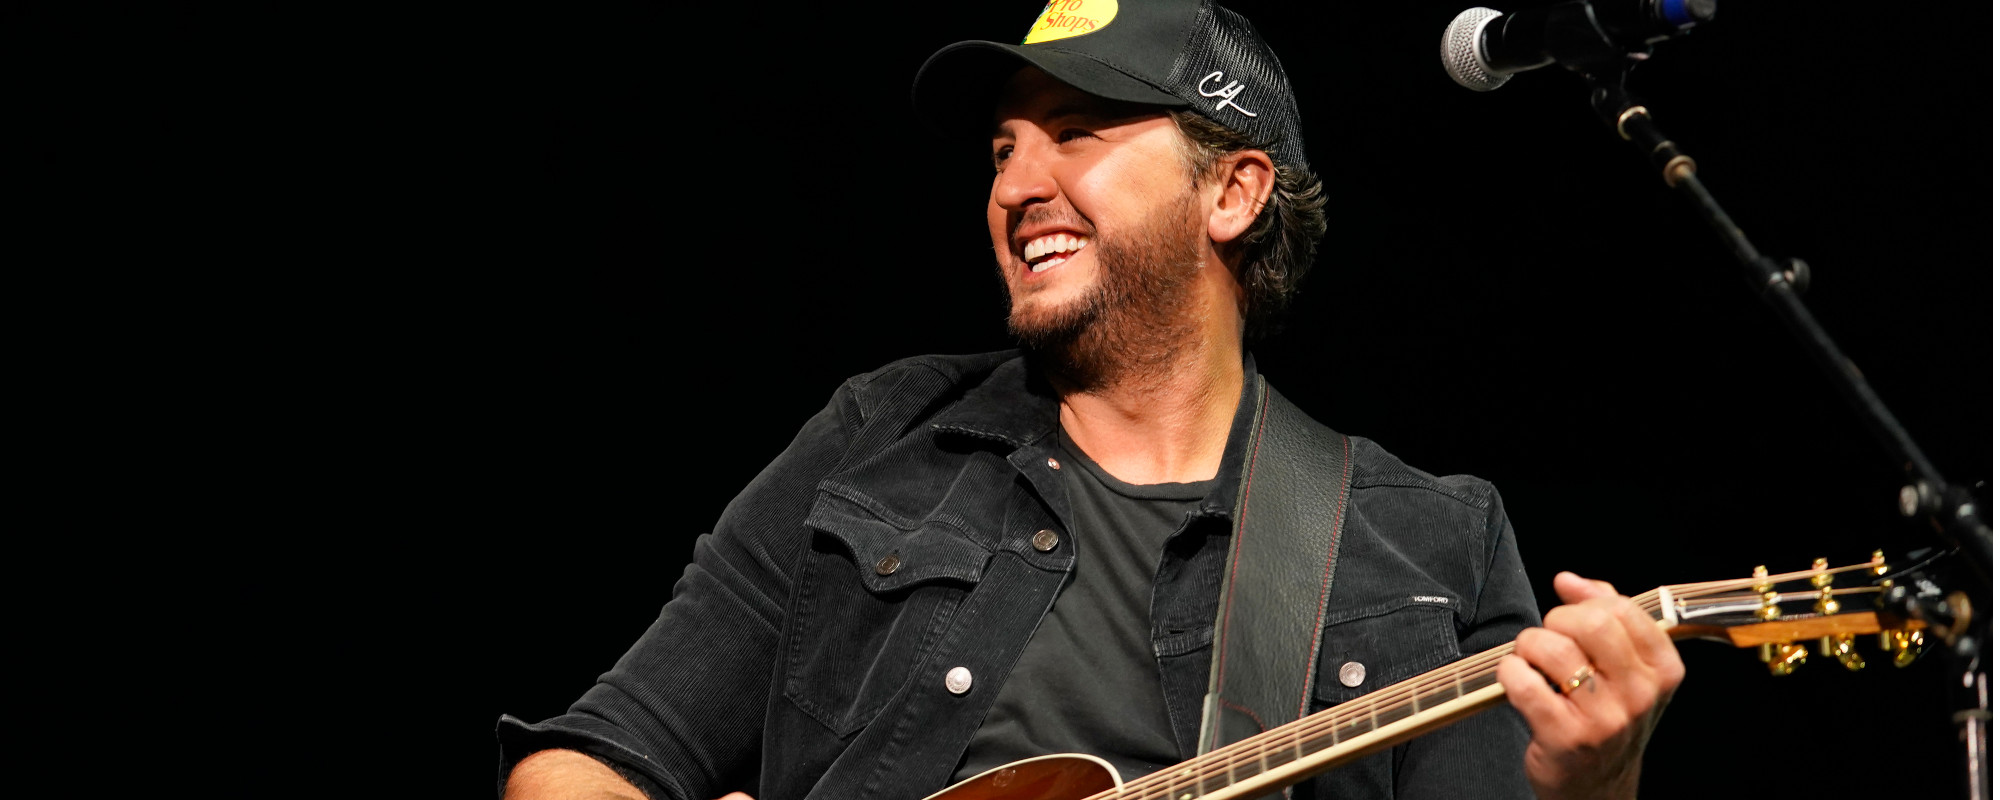 Behind the Meaning of “Play It Again” by Luke Bryan